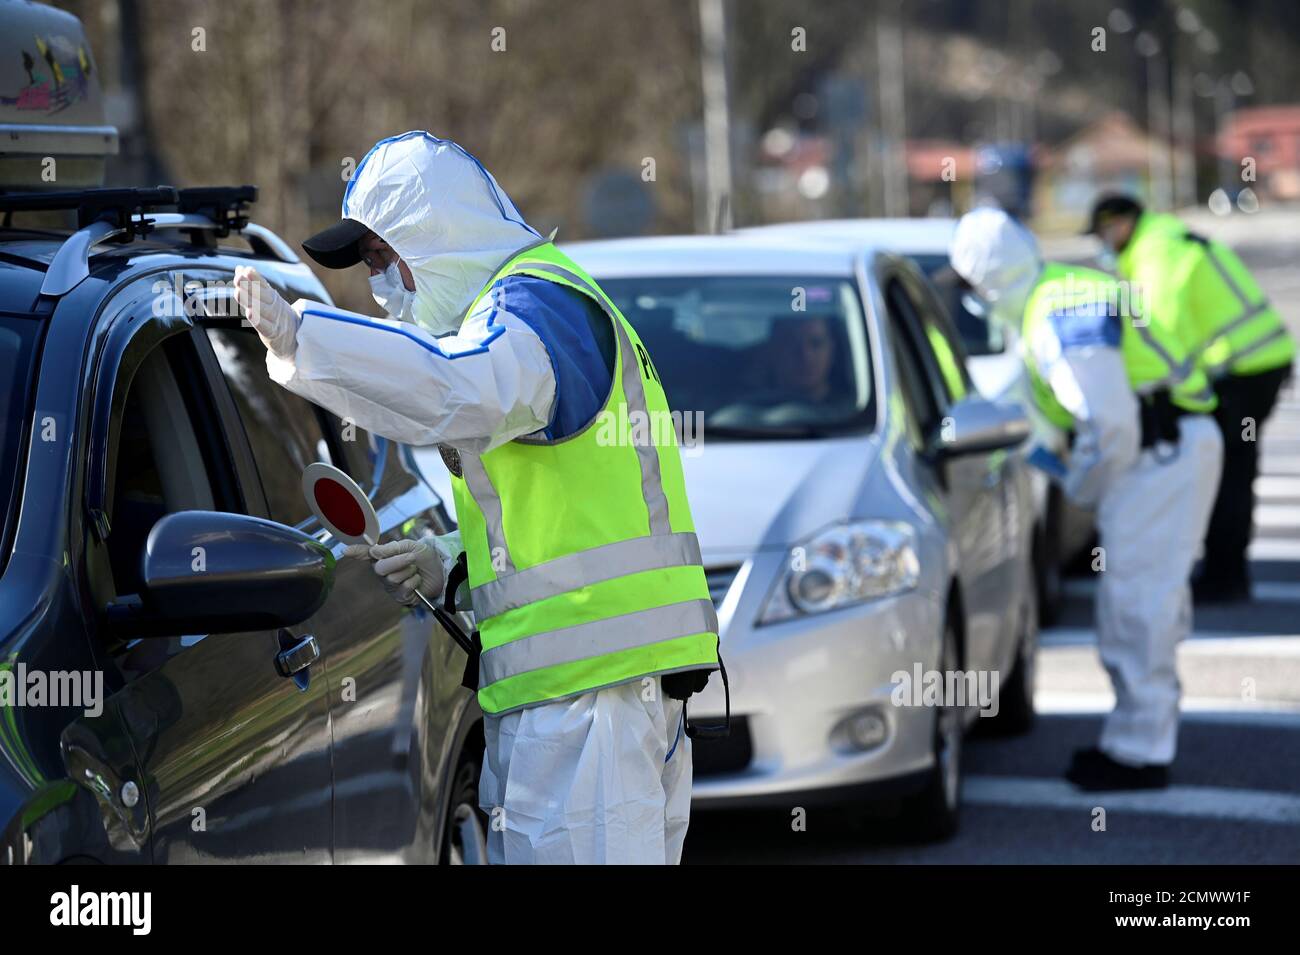 Police officers in a protective suits speak with people inside cars at Slovak-Czech border in Drietoma crossing, Slovakia, March 13, 2020. REUTERS/Radovan Stoklasa Stock Photo